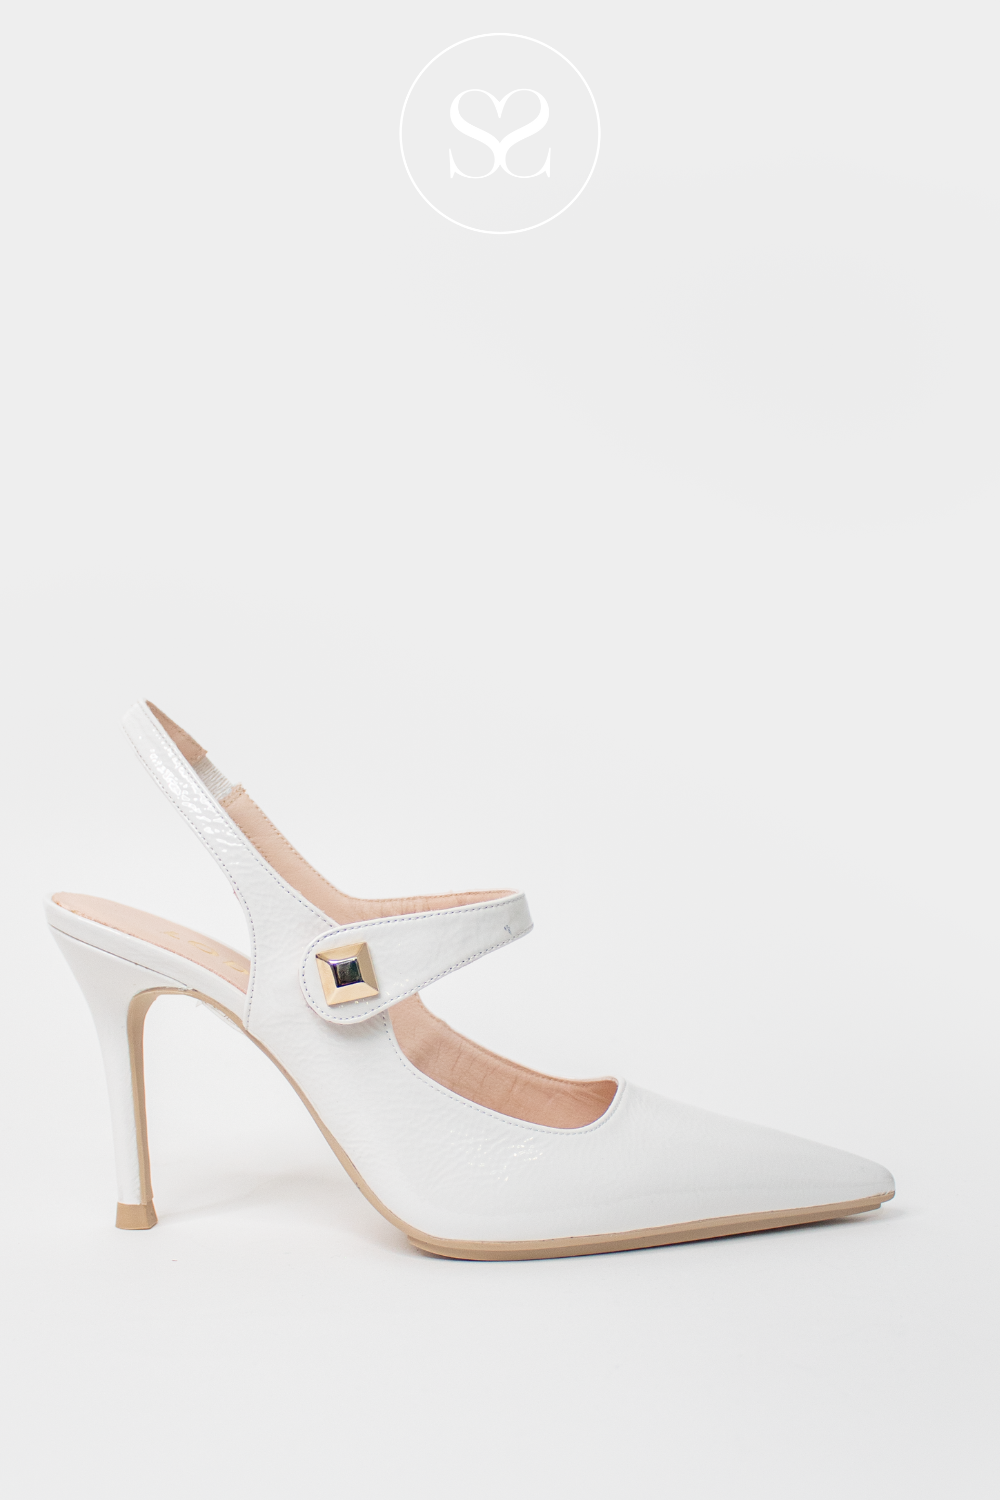 LODI SALEN WHITE PATENT POINTED TOE SLINGBACK HIGH HEEL WITH STRAP ACROSS FOOT